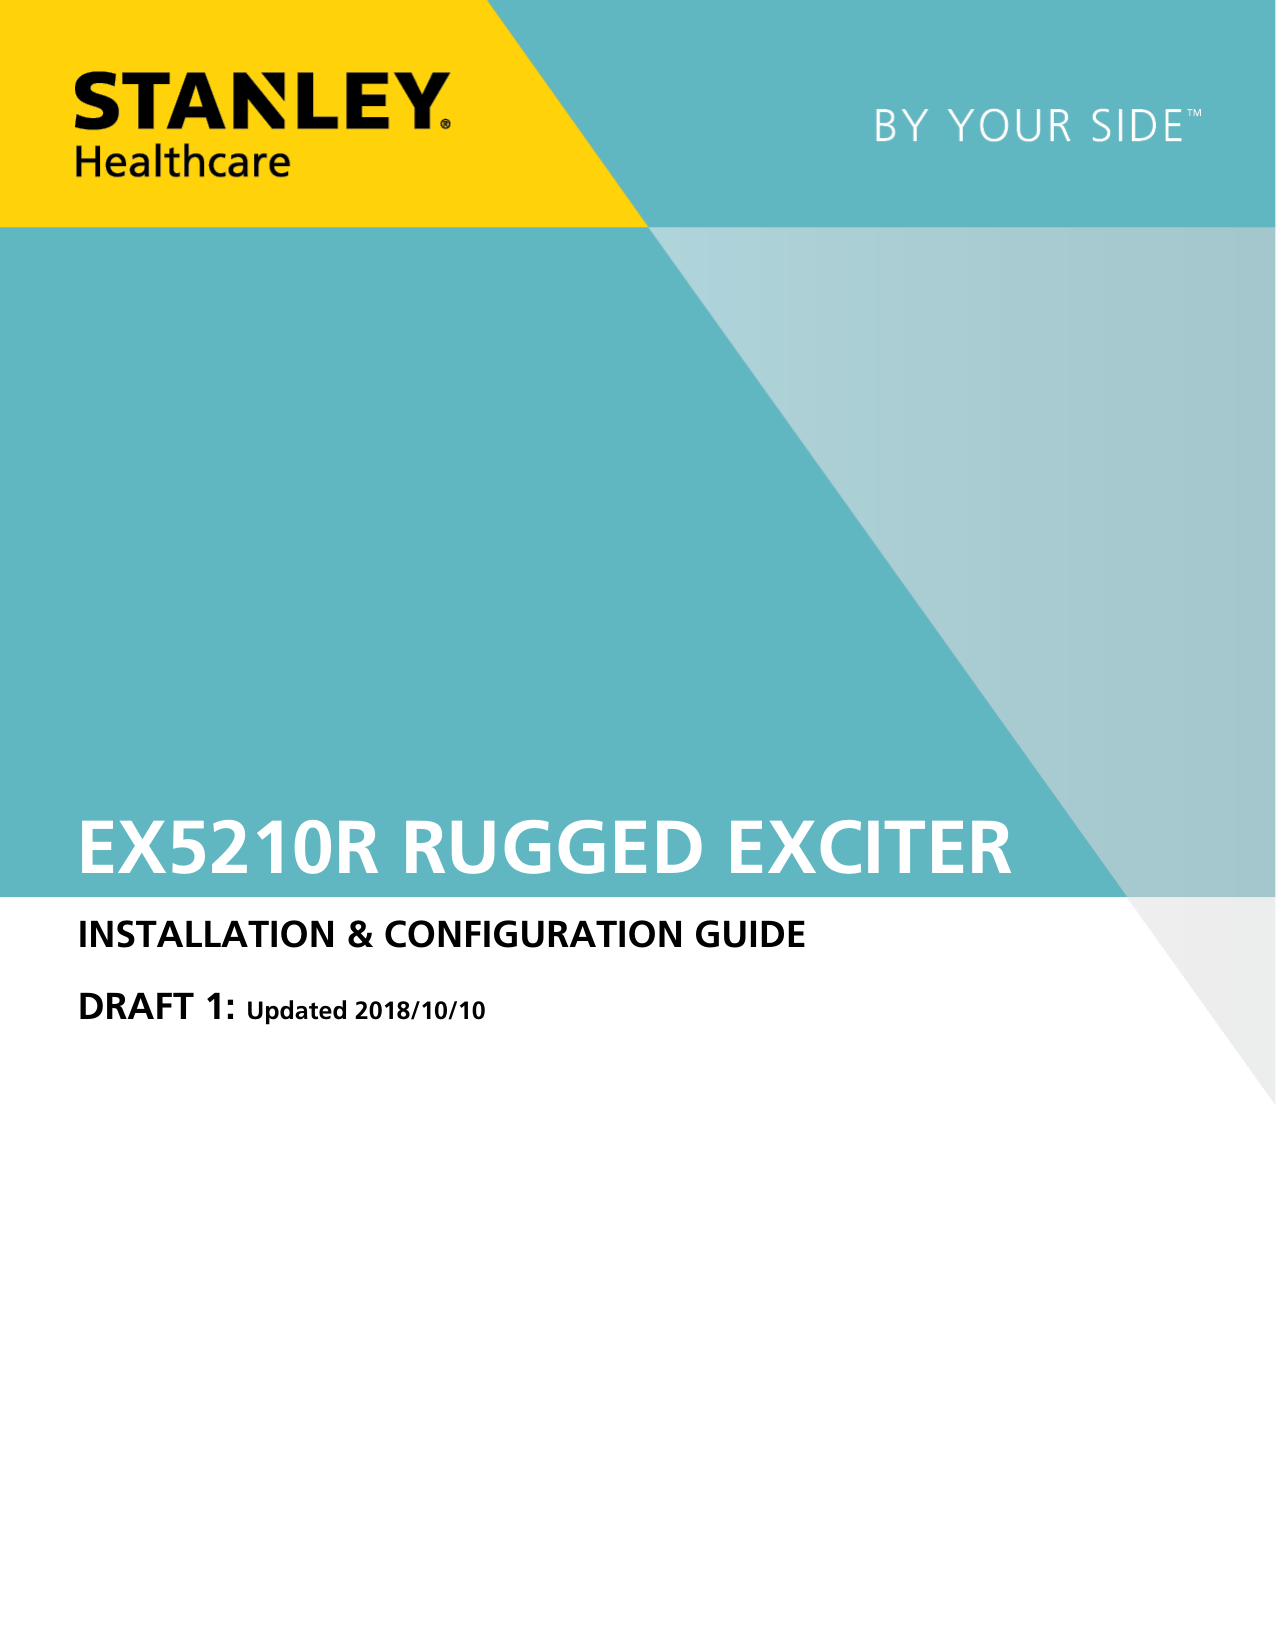      EX5210R RUGGED EXCITER INSTALLATION &amp; CONFIGURATION GUIDE DRAFT 1: Updated 2018/10/10 